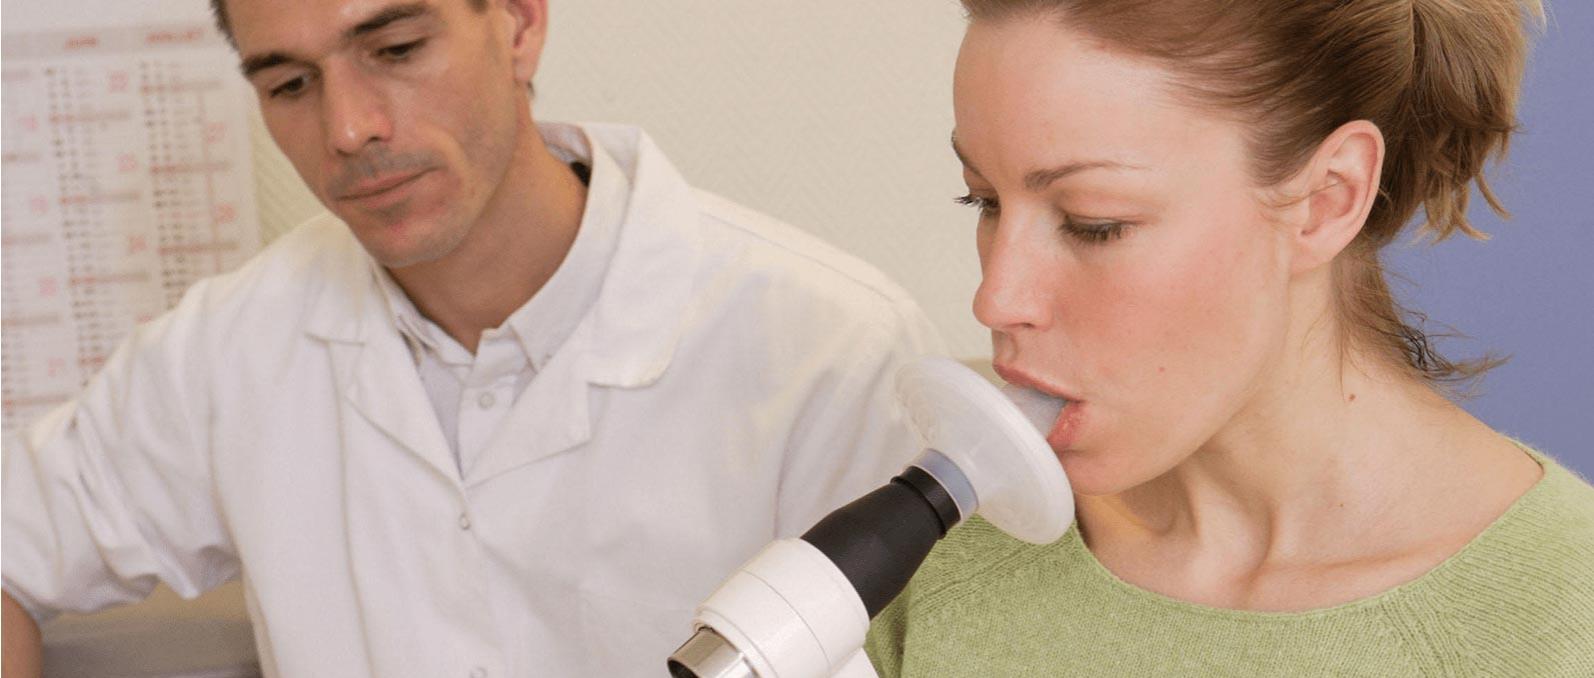 Looking for PFT testing near you, ACCESS HEALTH CARE PHYSICIANS, LLC offer the best spirometry tests in Florida